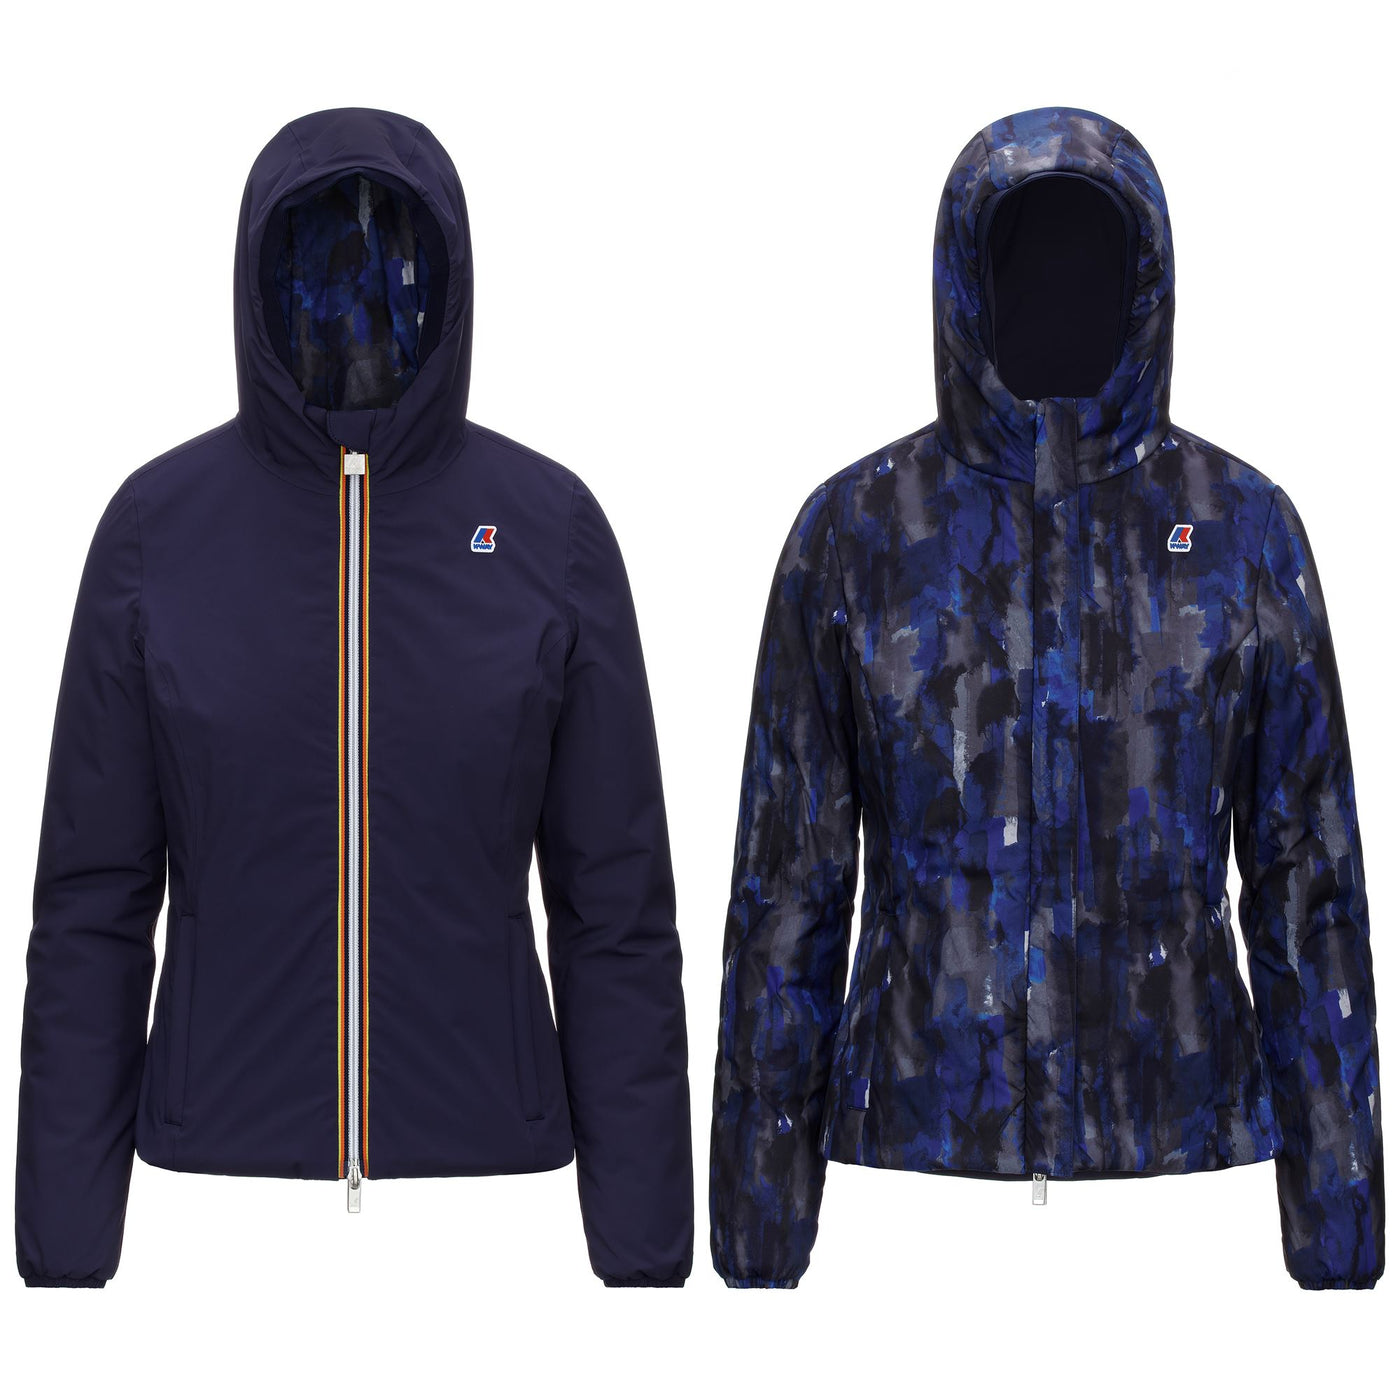 Jackets Woman LILY WARM DOUBLE GRAPHIC Short BLUE MARITIME - BLUE ABSTRACT Photo (jpg Rgb)			